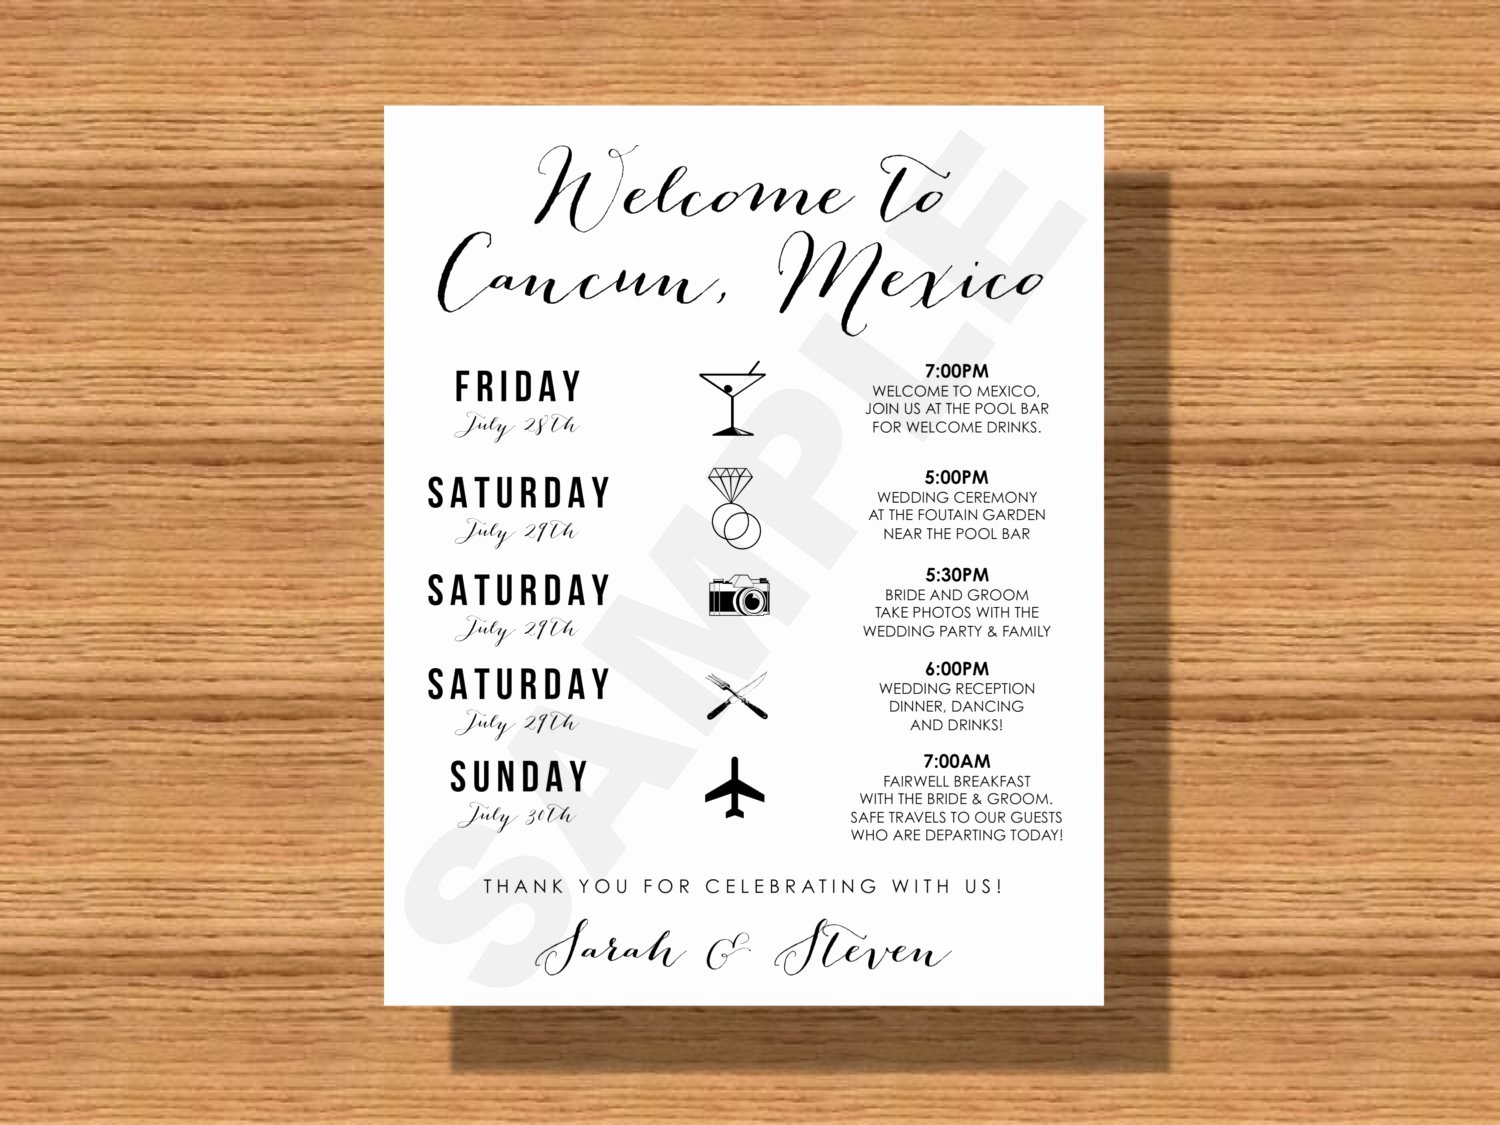 Wedding Welcome Bag Itinerary Template Best Of Destination Wedding Weekend Itinerary Wedding Schedule Of